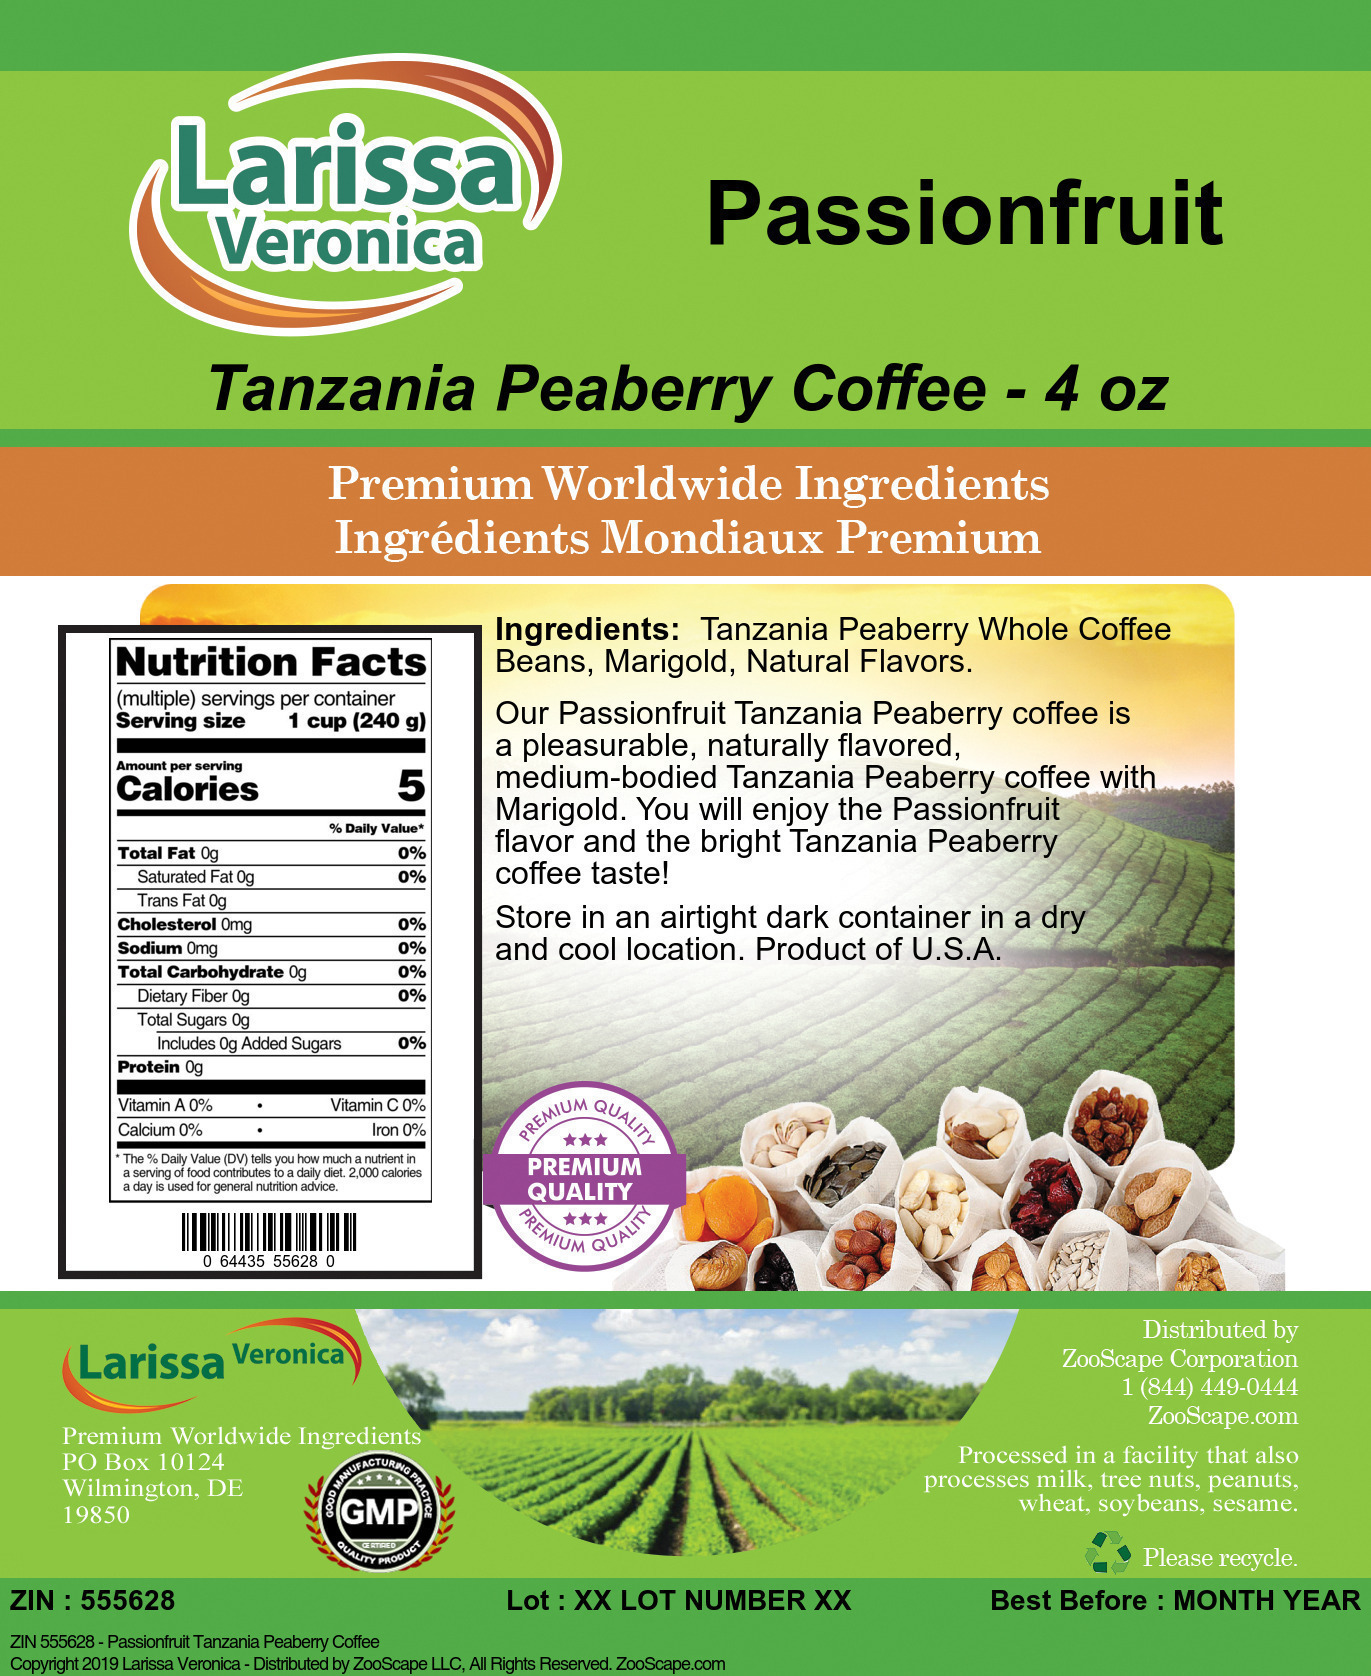 Passionfruit Tanzania Peaberry Coffee - Label